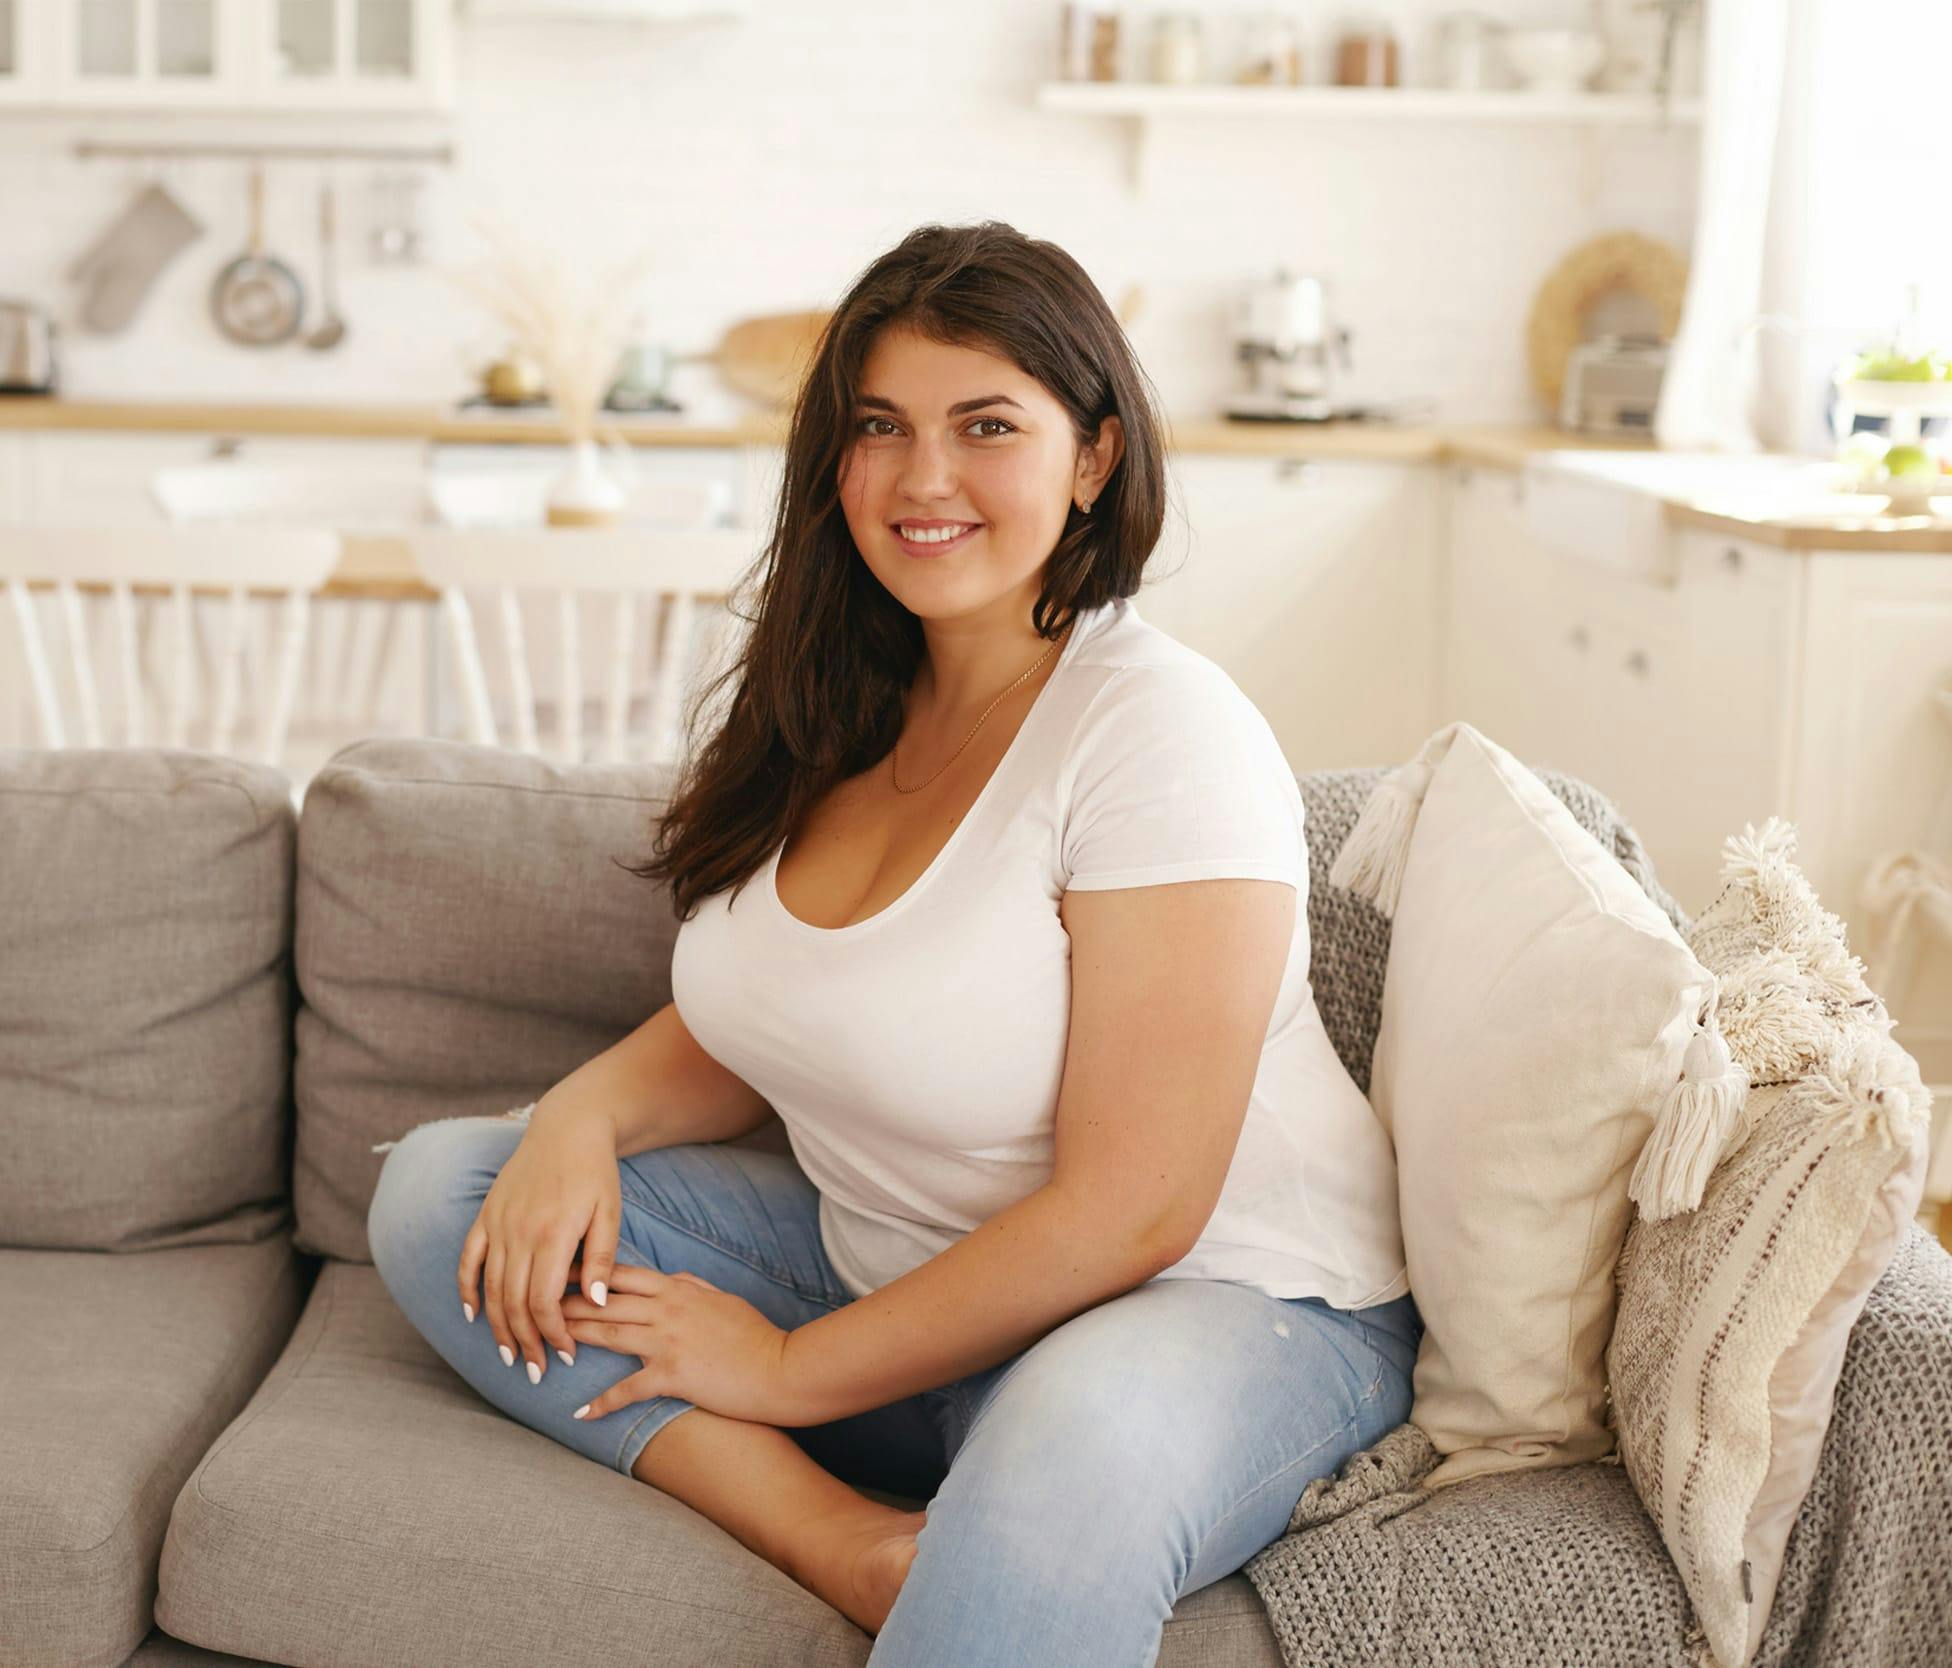 Woman smiling and sitting on the couch